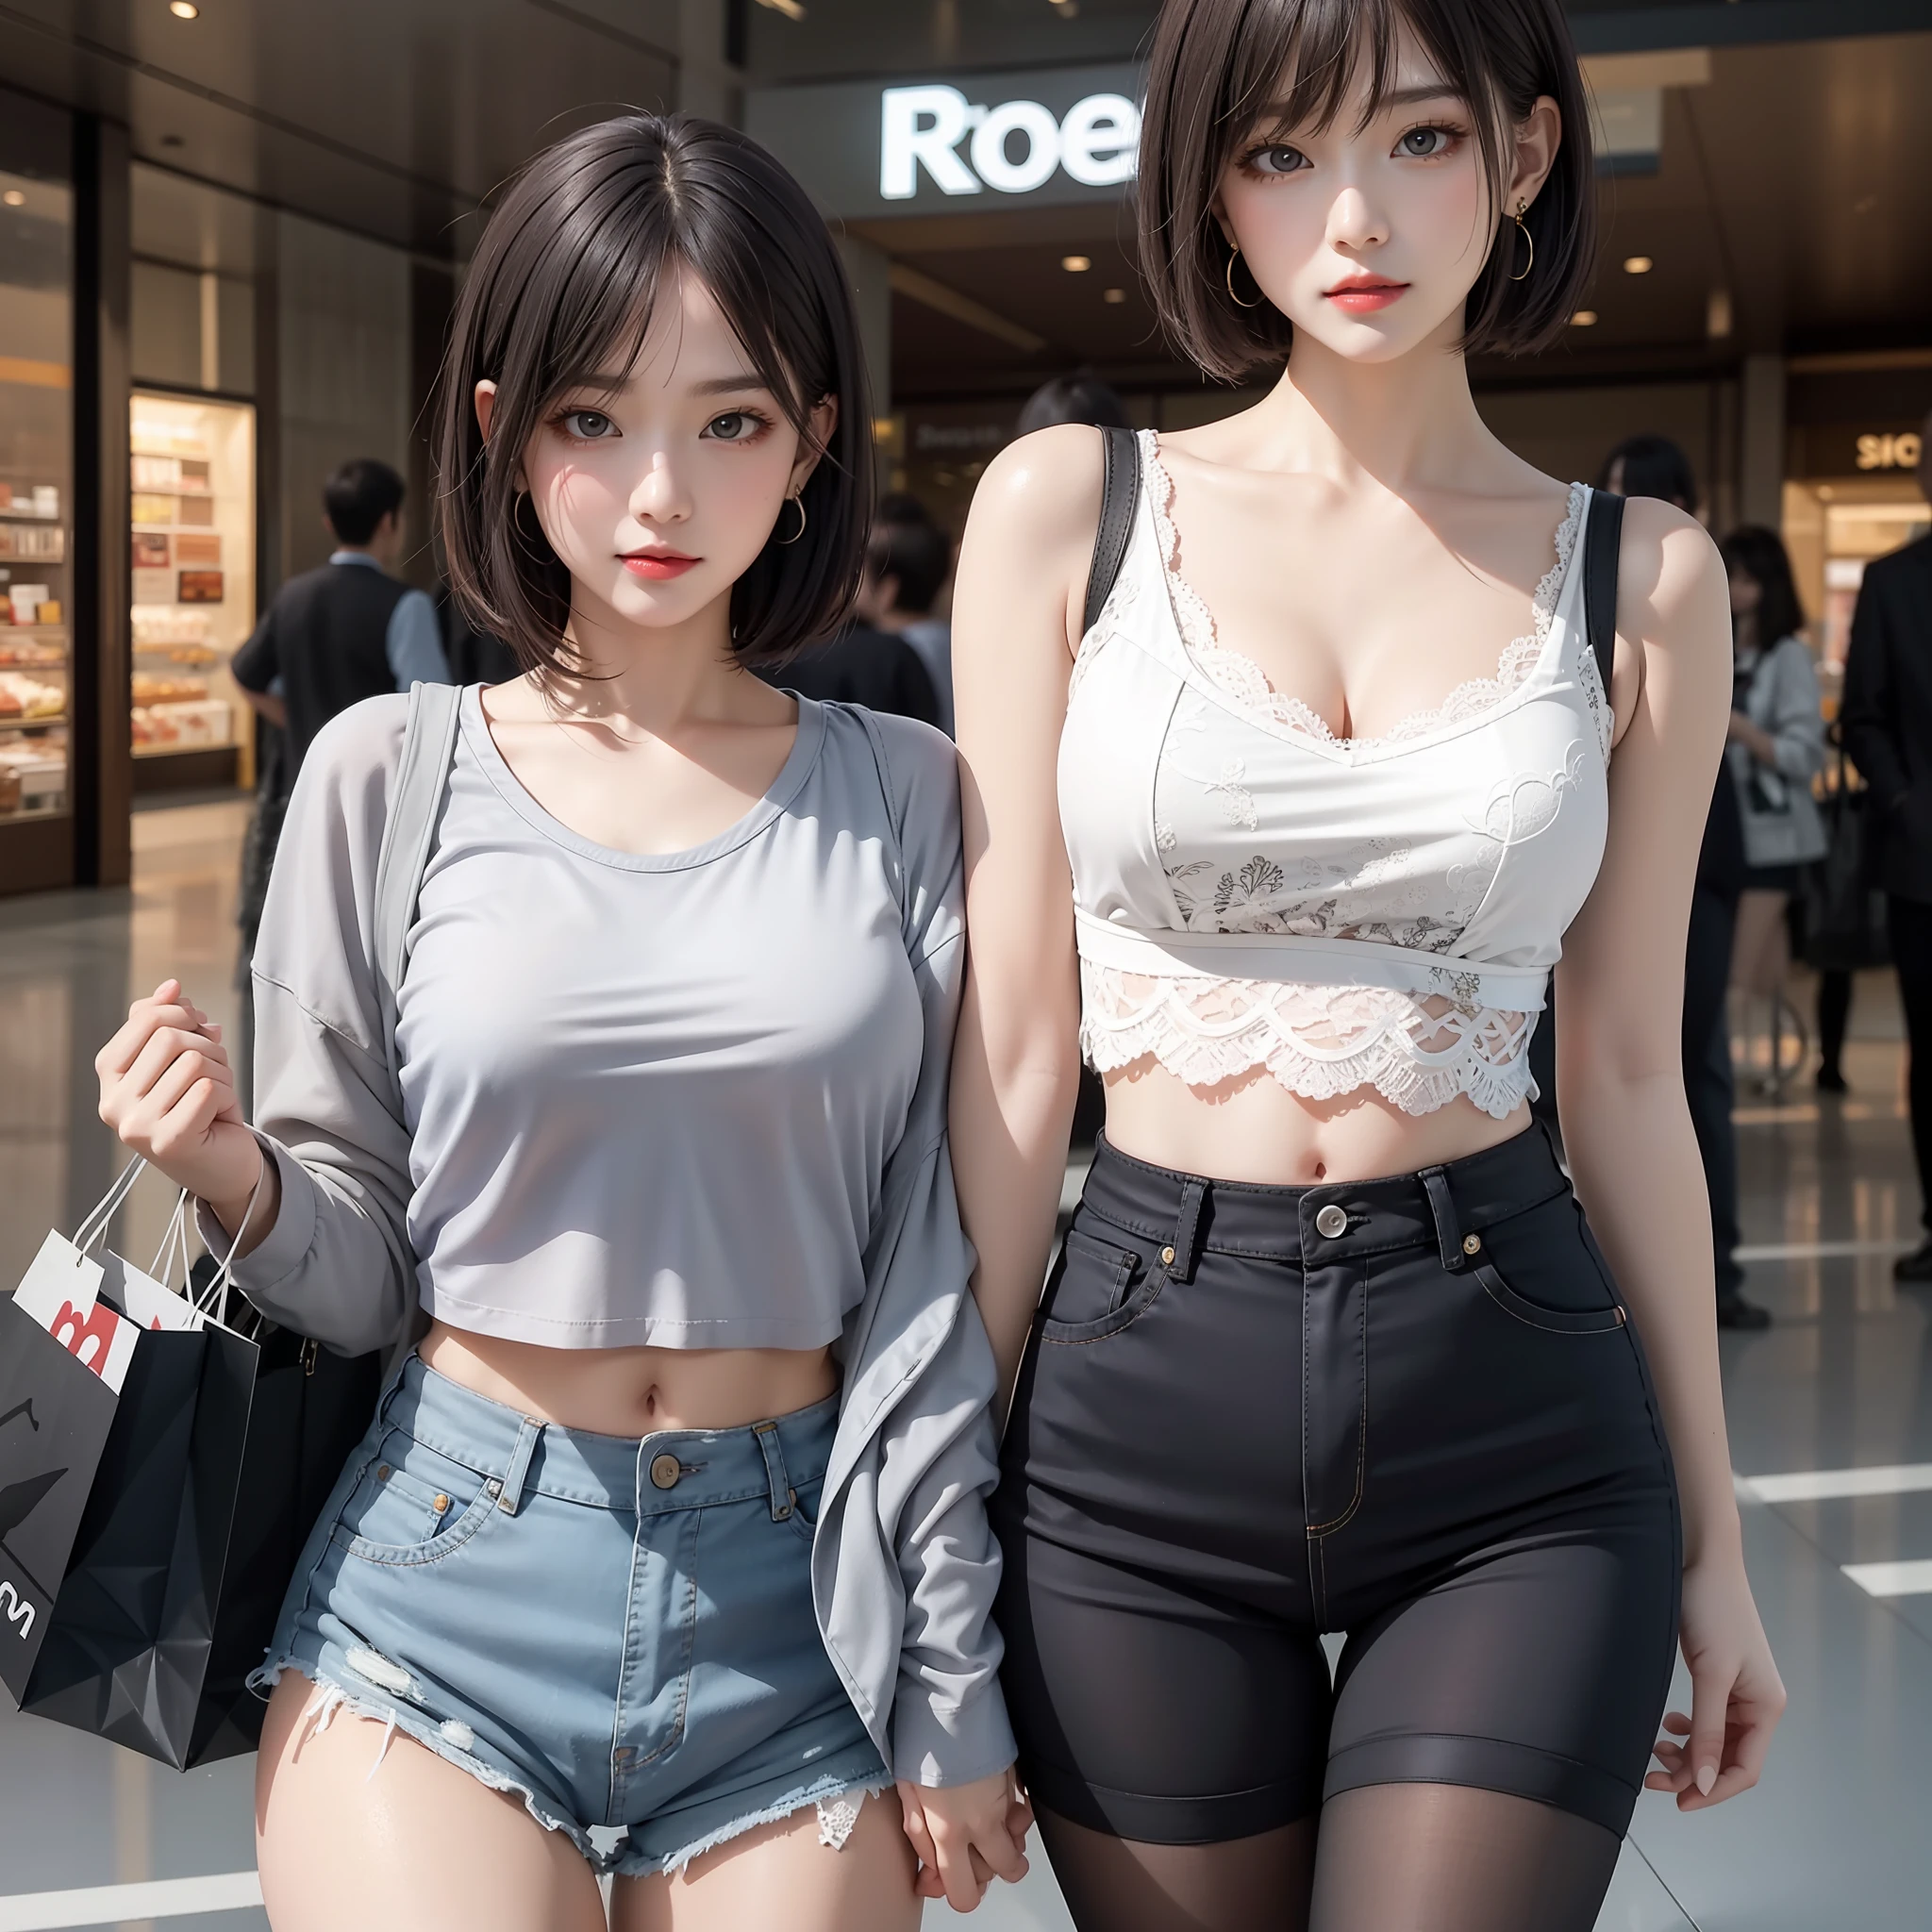 Urban beauty, masterpiece, light makeup, red lips, short hair, shopping mall background, beautiful, elegant. Ultra-fine details, master works, real texture, cinematic lighting realism, perfect works, 8k, high definition, exquisite facial features. The upper body is wearing an elastic sports crop top, and the exposed small man's waist looks white and clean. The lower body is wearing denim shorts lace, sexy tights, and the S-shaped curved body looks very smooth. Slim figure, pear-shaped body, rounded hips, slender small man's waist, sexy chest, vest line, collarbone, bright big eyes, smooth skin, earrings, tattoos, slender long legs. Deep in the human, cat cherry lips. Perfect waist-hip ratio